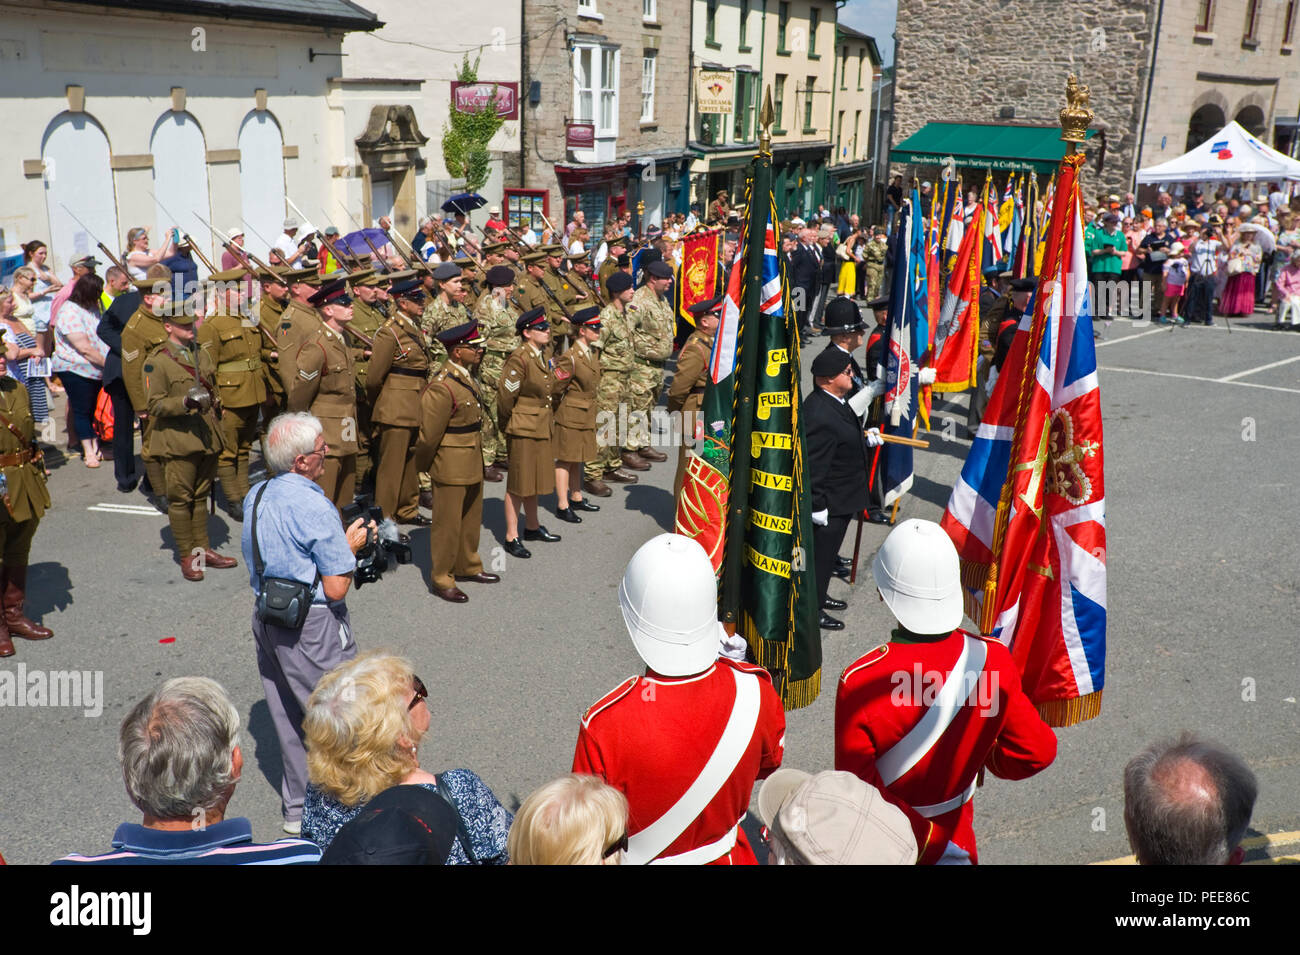 World War One commemorative event ceremony in the market square at Hay-on-Wye Powys Wales UK Stock Photo